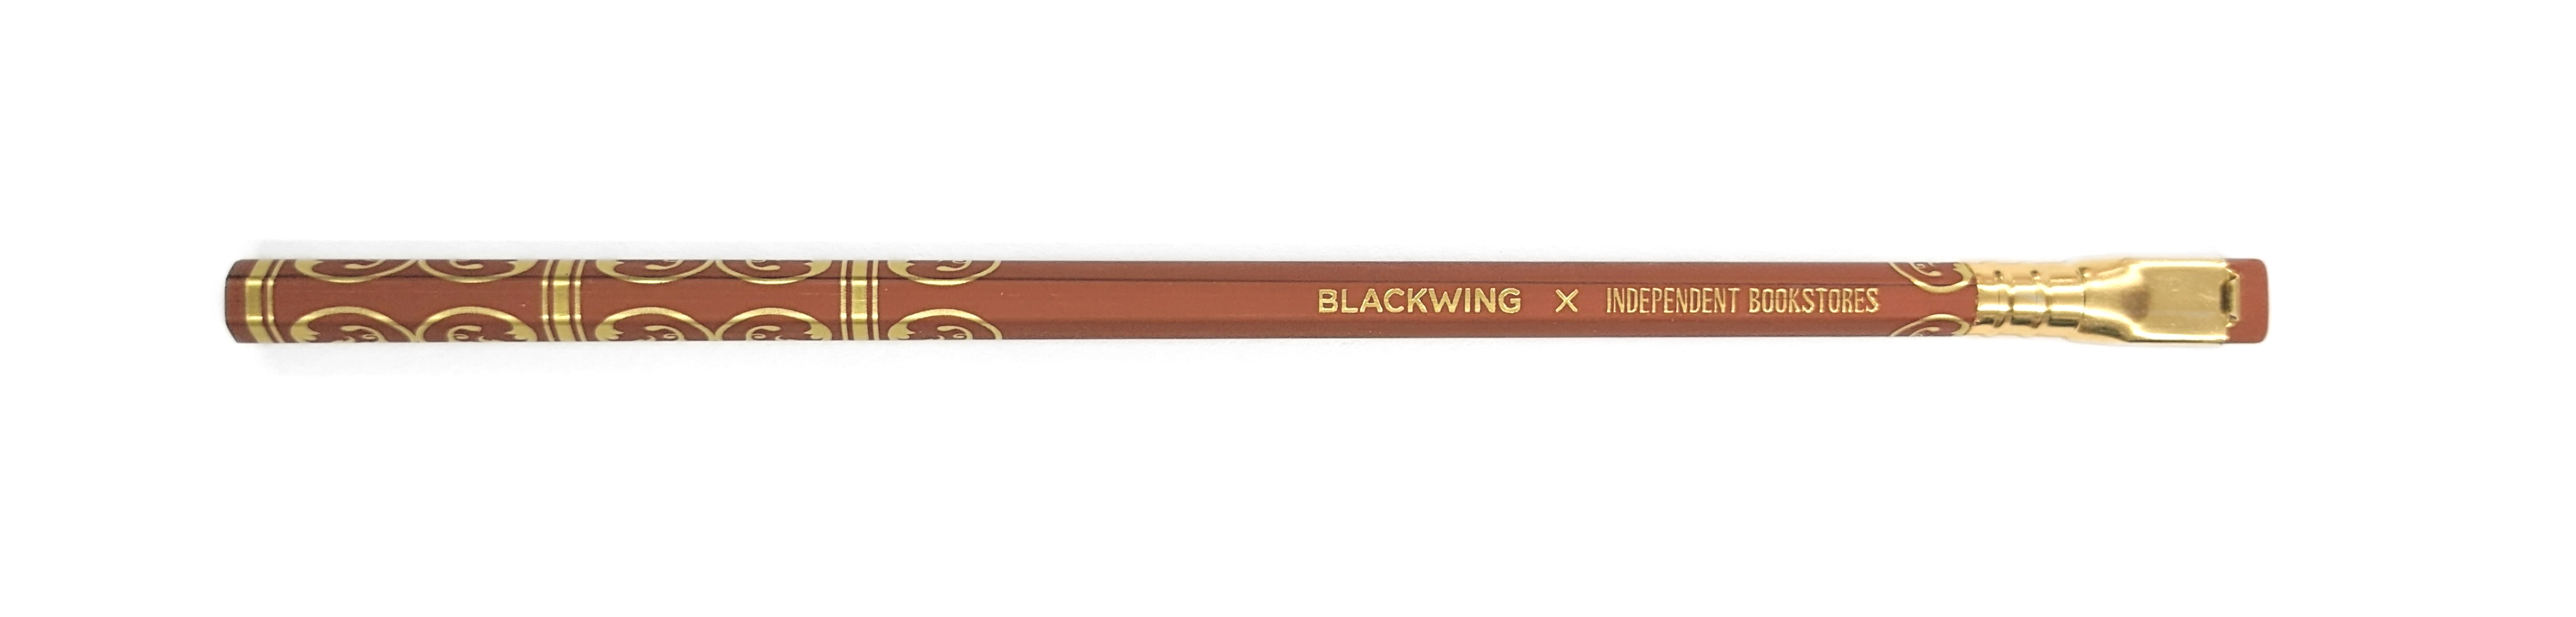 BLACKWING Bleistift The Book Store Firm Limited Edition